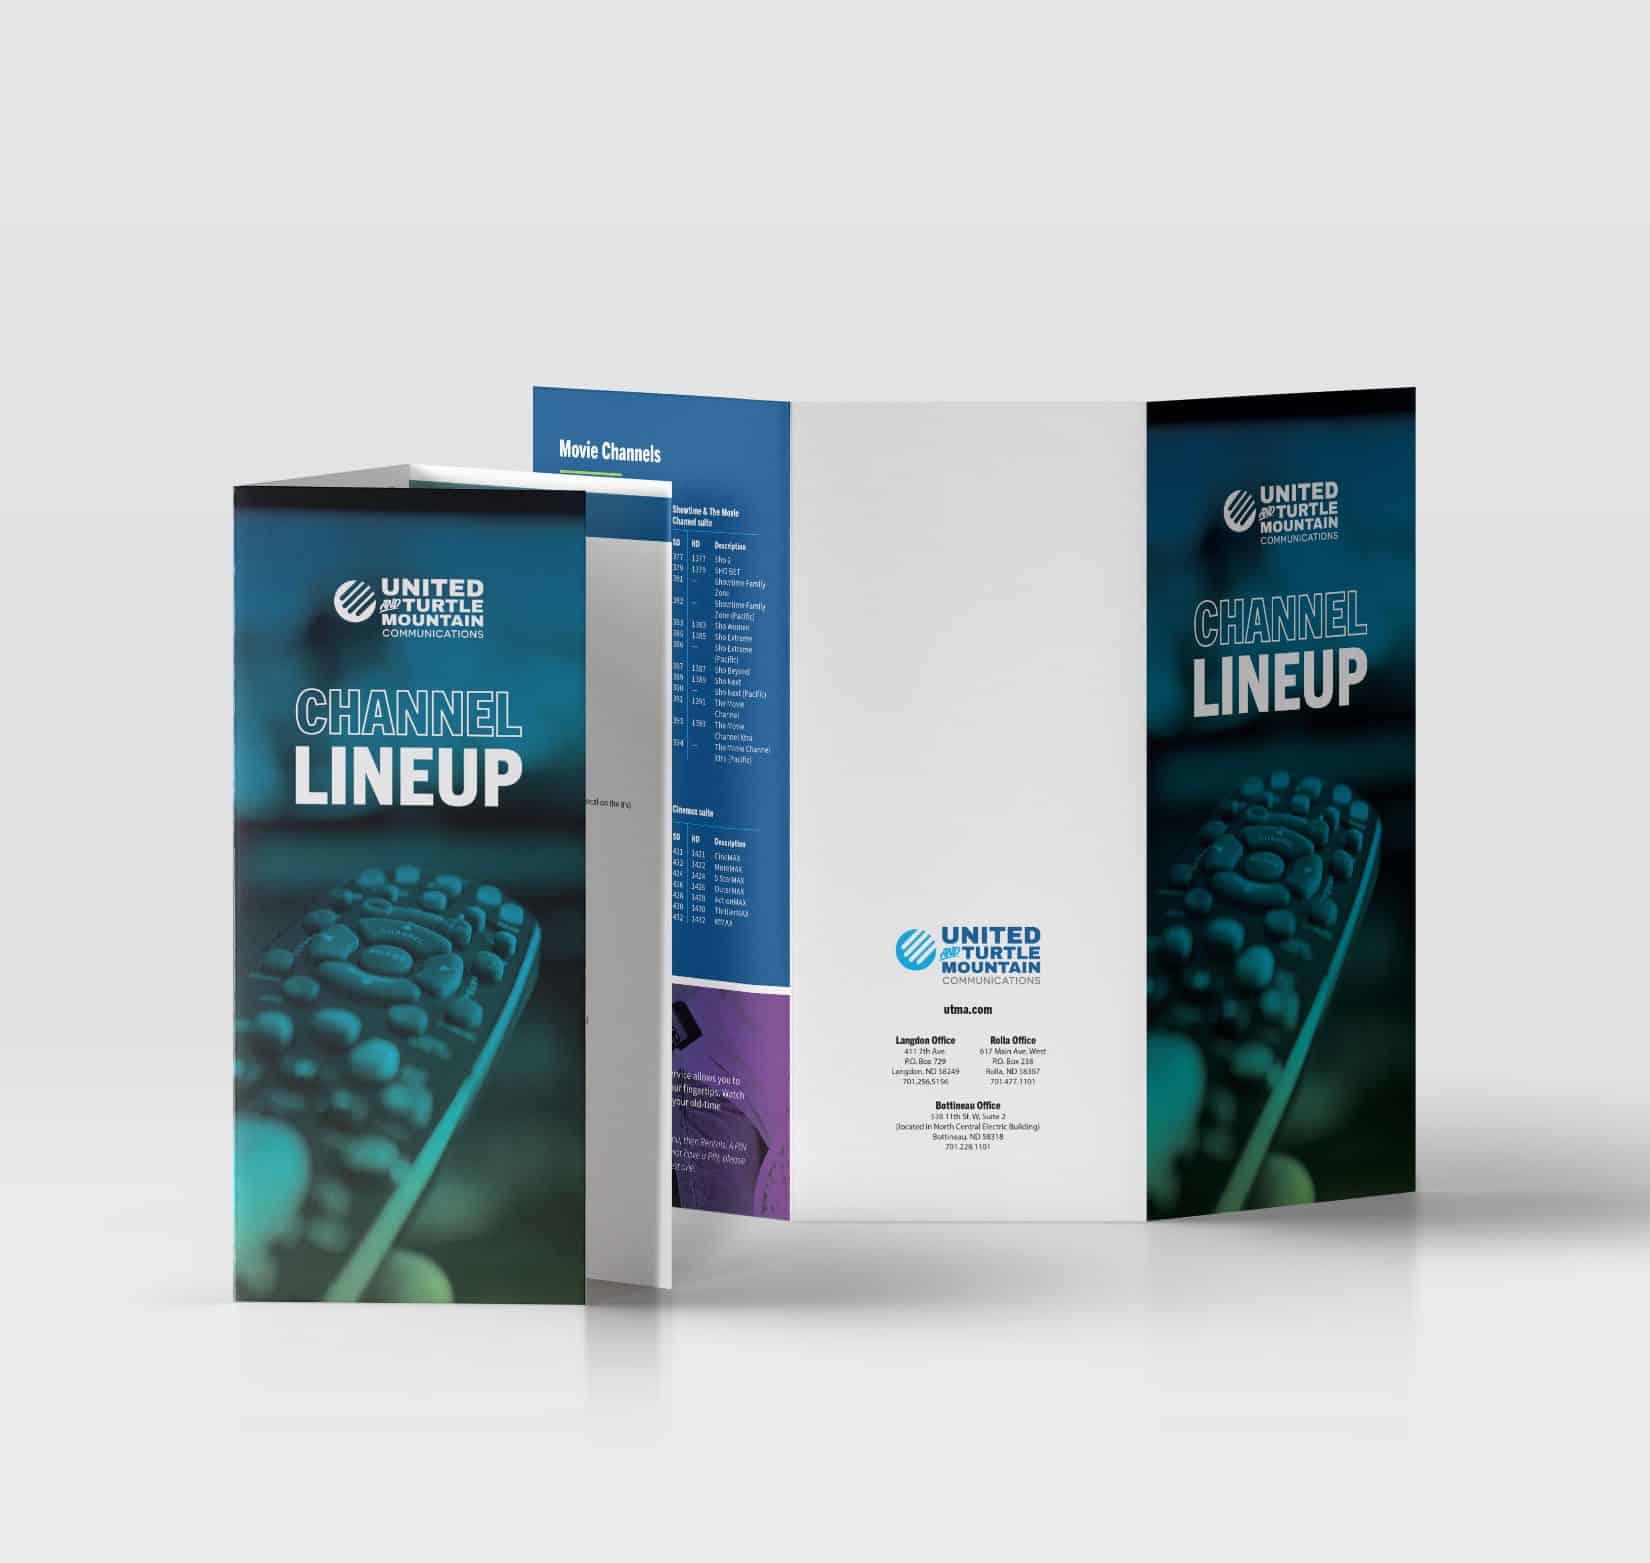 Two copies of a color printed tri-fold channel lineup guide for United Communications propped up on a white background